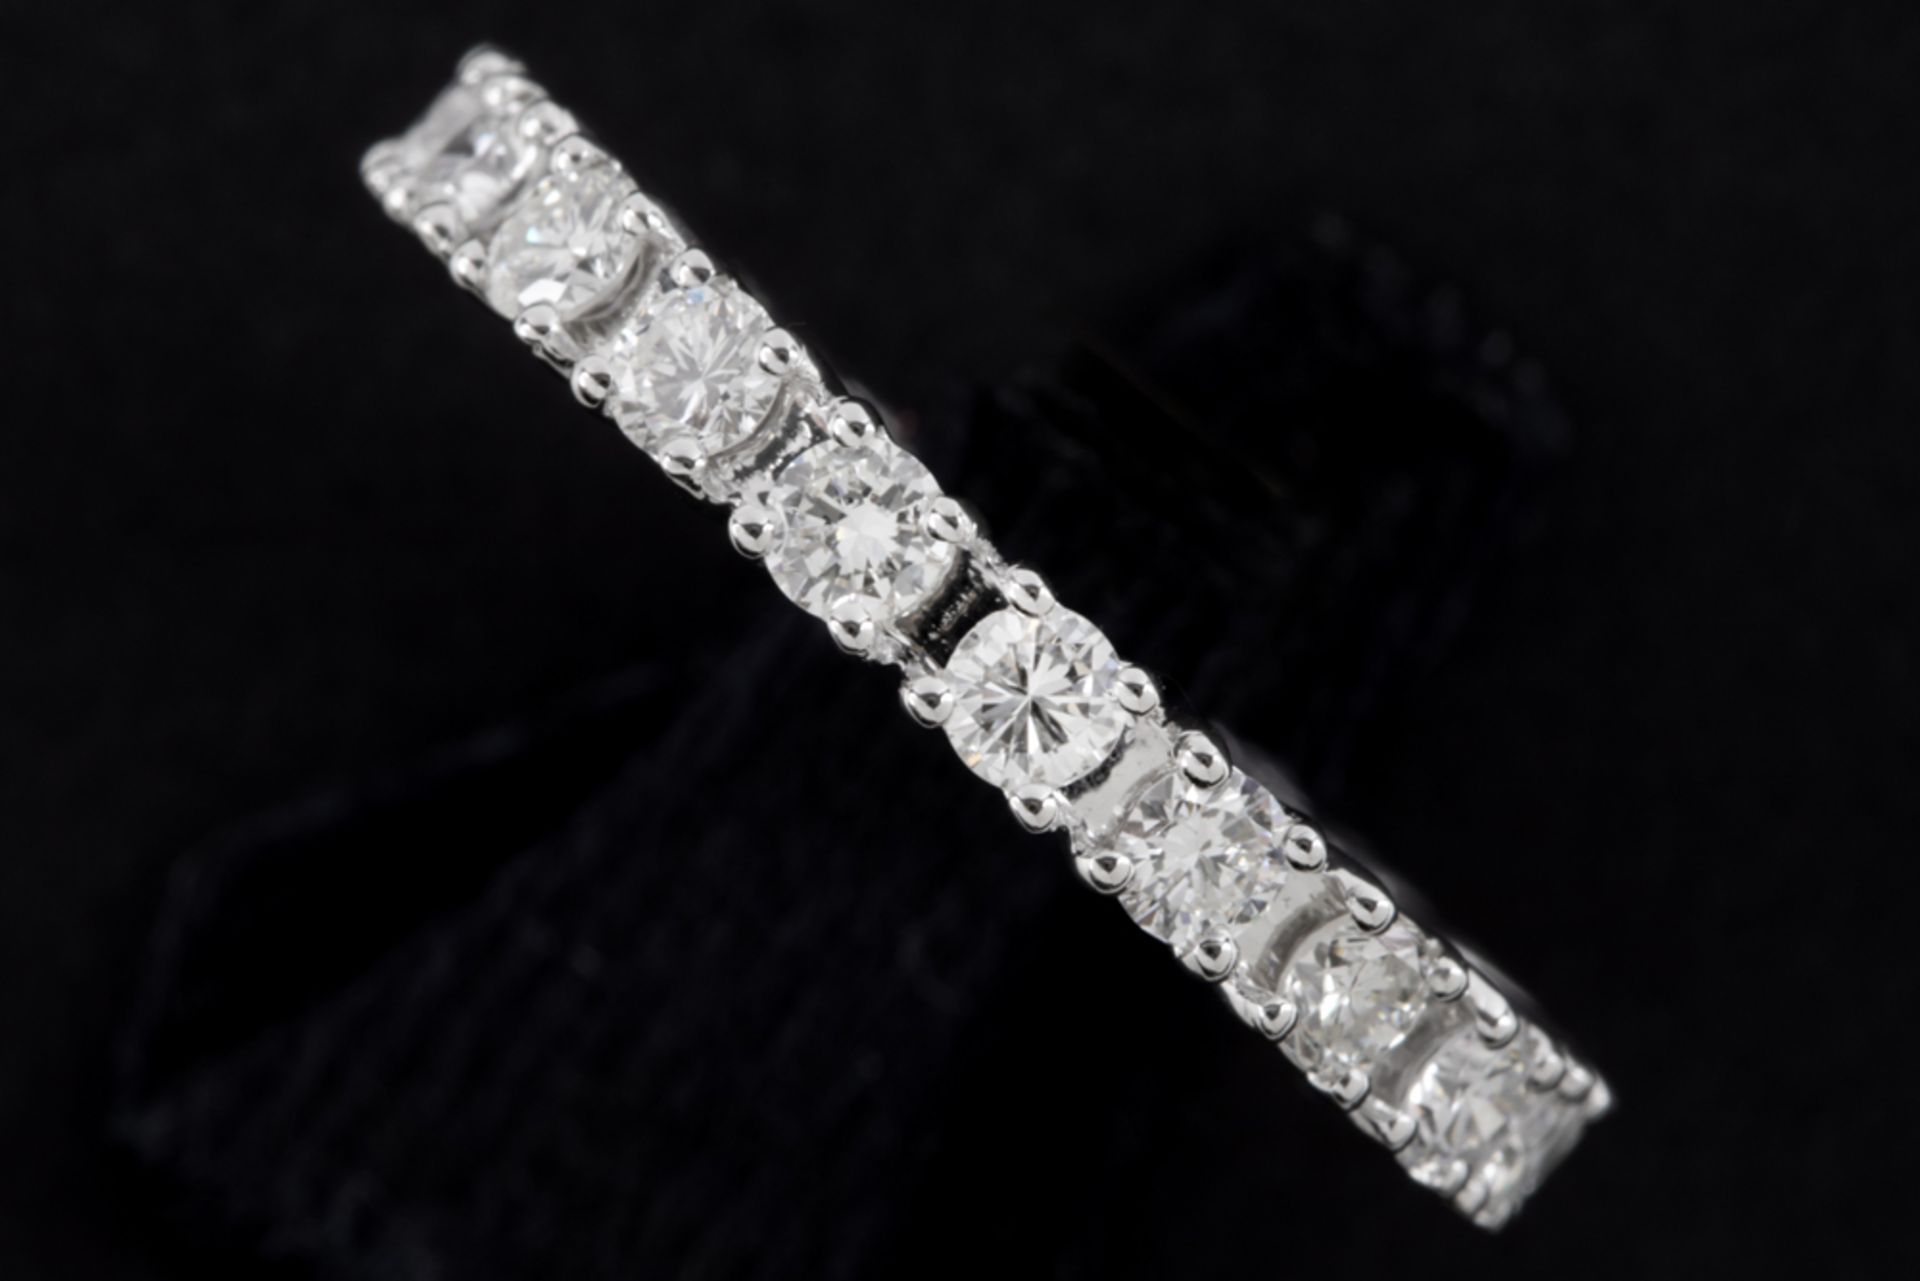 ring in white gold (18 carat) with 1,80 carat of very high quality brilliant cut diamonds ||